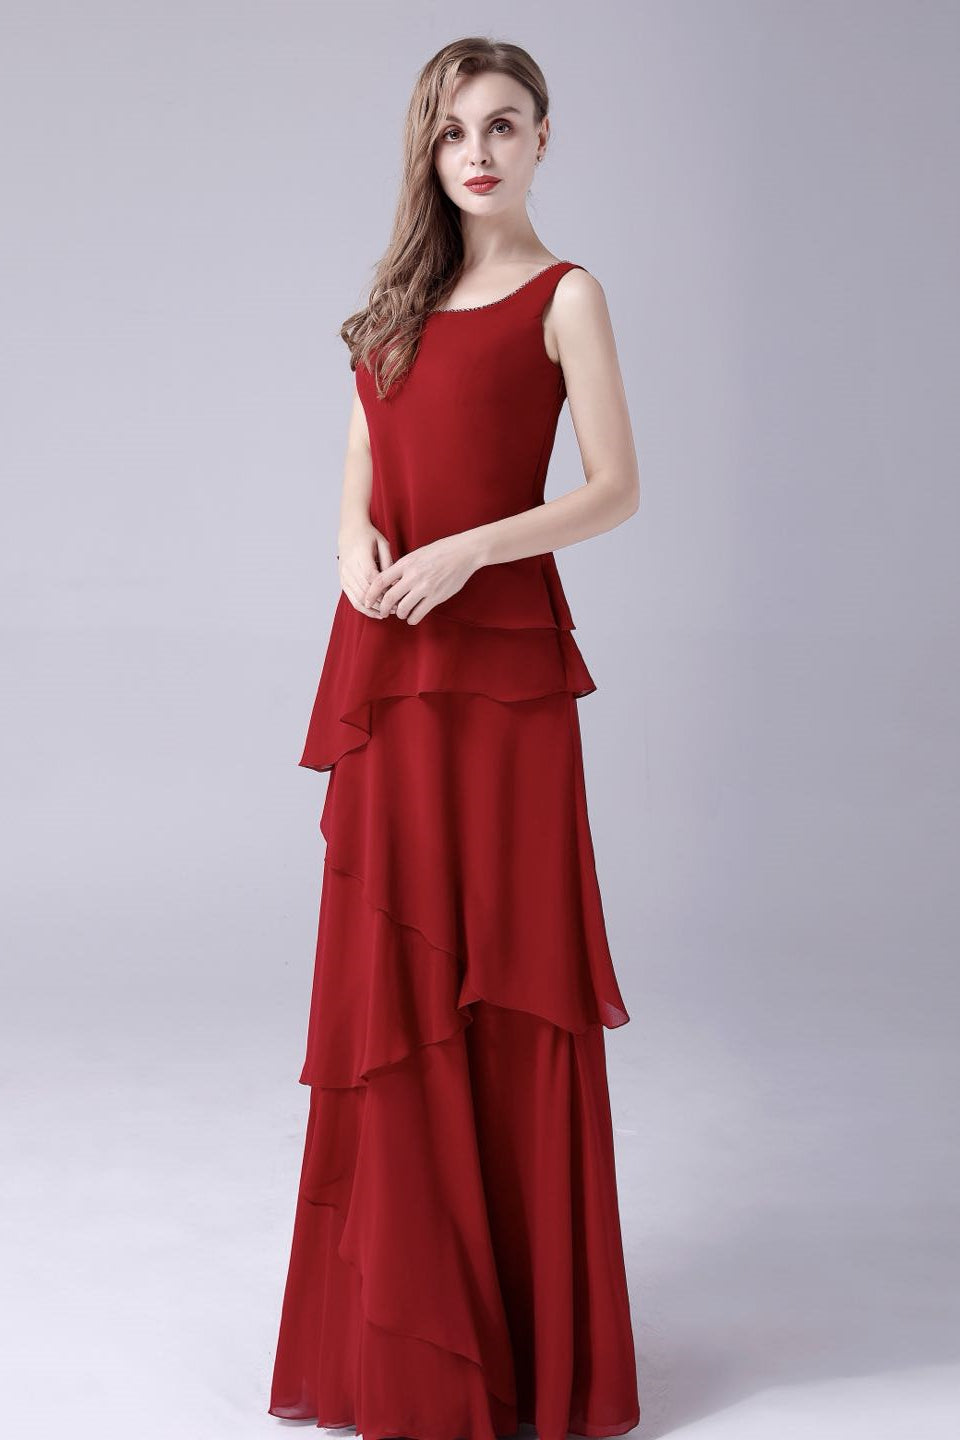 Winter Dress, Burgundy Ruffles Chiffon Mother of the Bride Dresses With Jacket